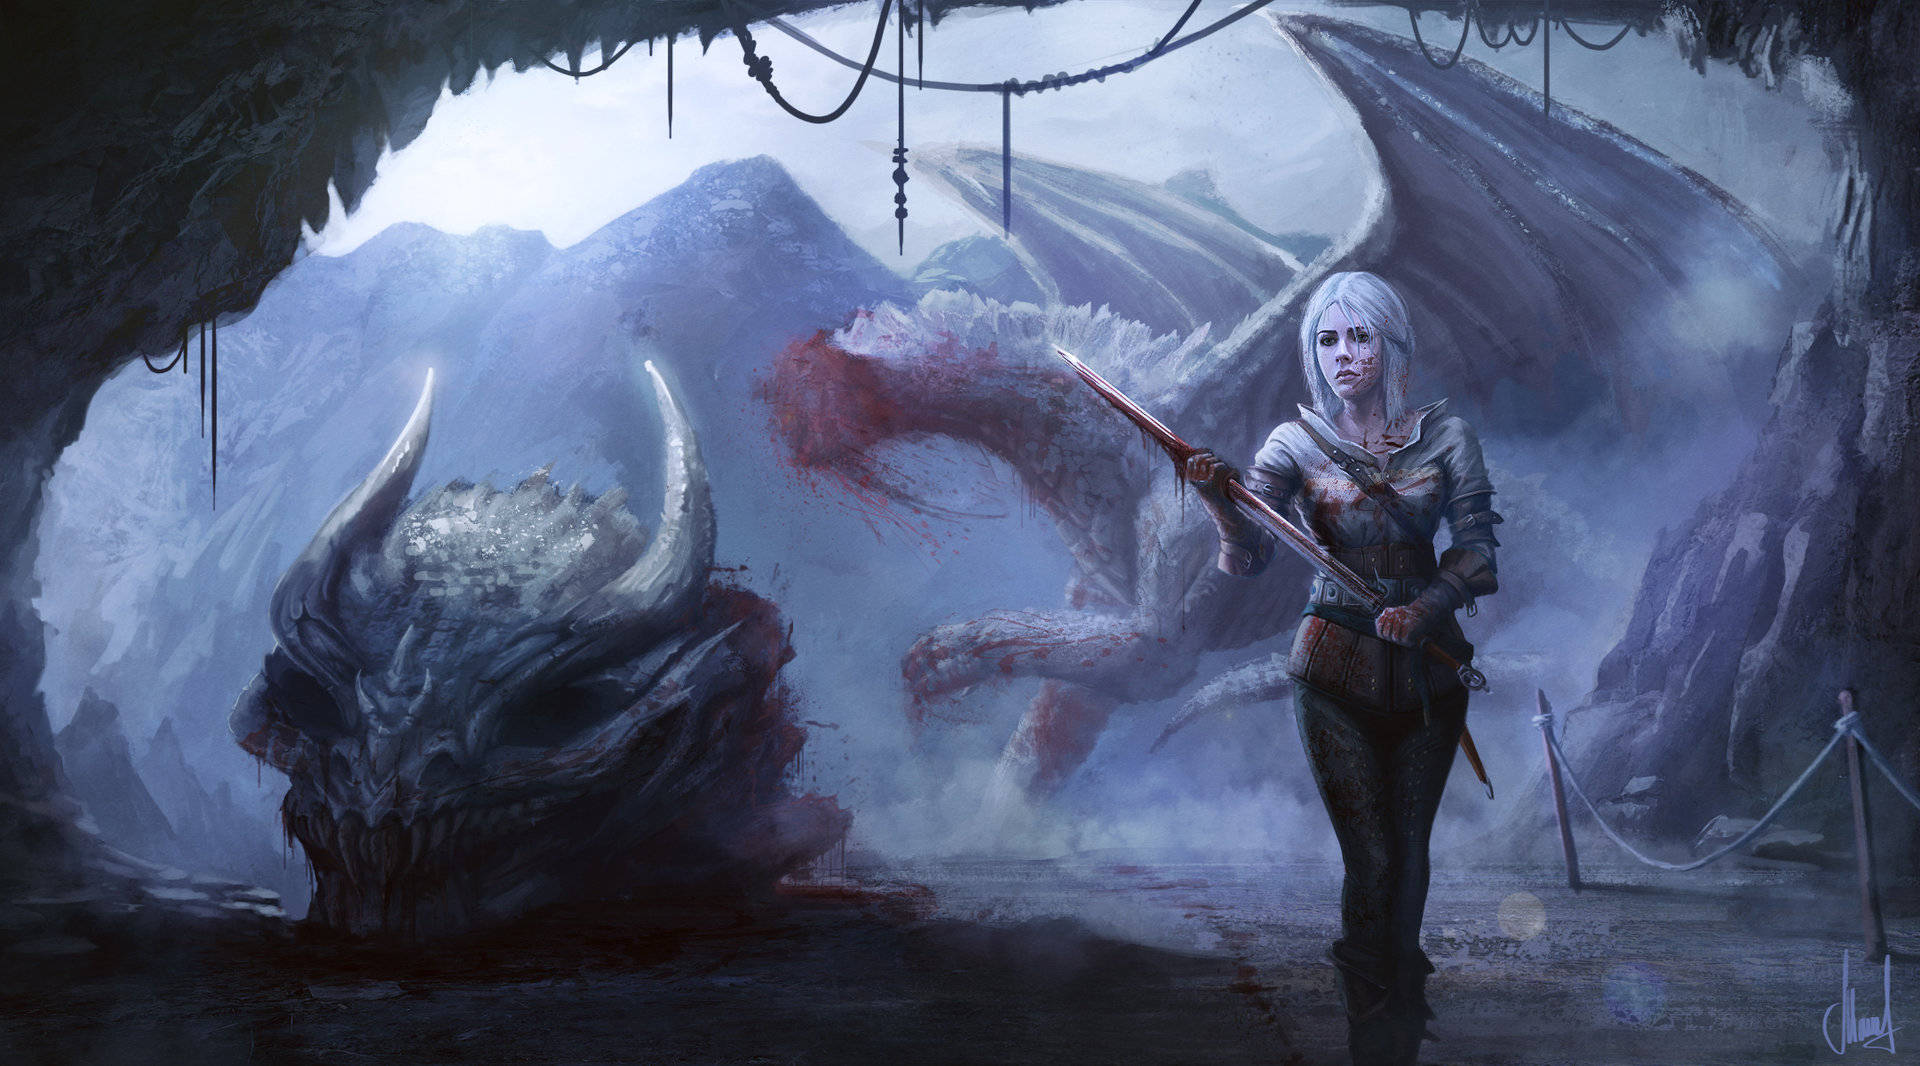 "Ciri Slaying a Monster in The Witcher 3" Wallpaper